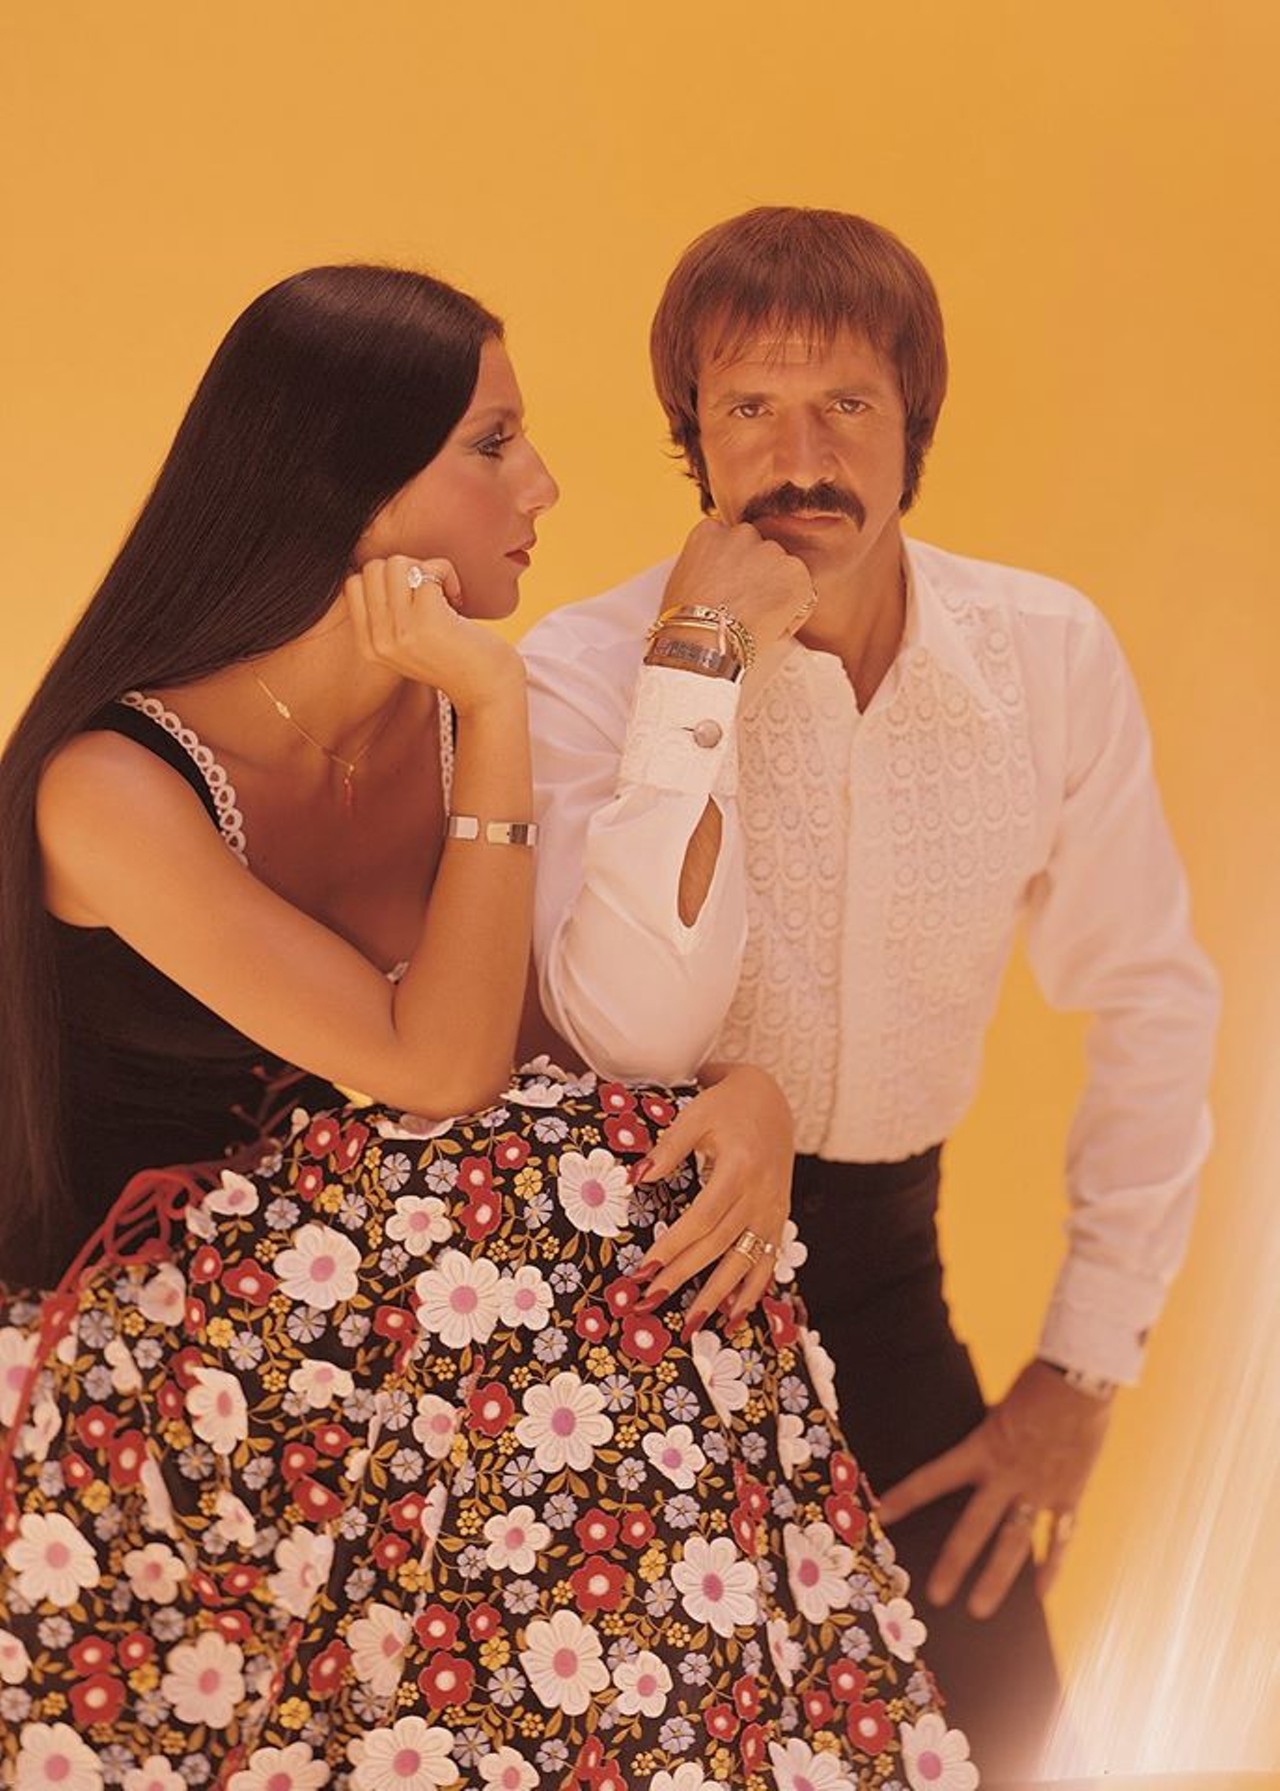 17 year old Cher in the ’60s with Sonny Bono. Come on floral print!
Photo via Facebook / Cher